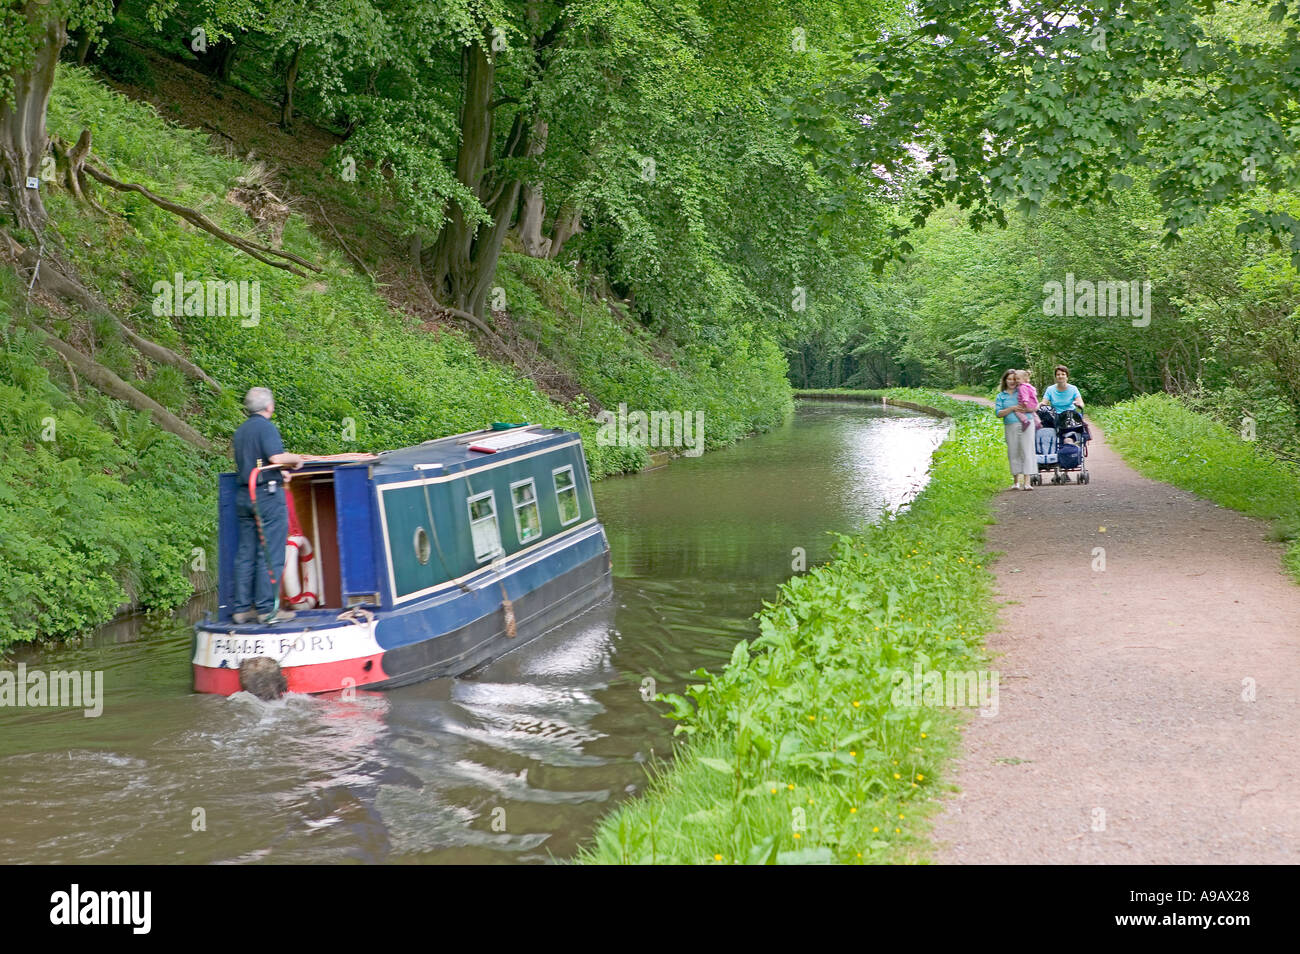 Canal boat on canal and towpath with pedestrians walking Brecon and Monmouth canal near Llanfoist South Wales UK Stock Photo